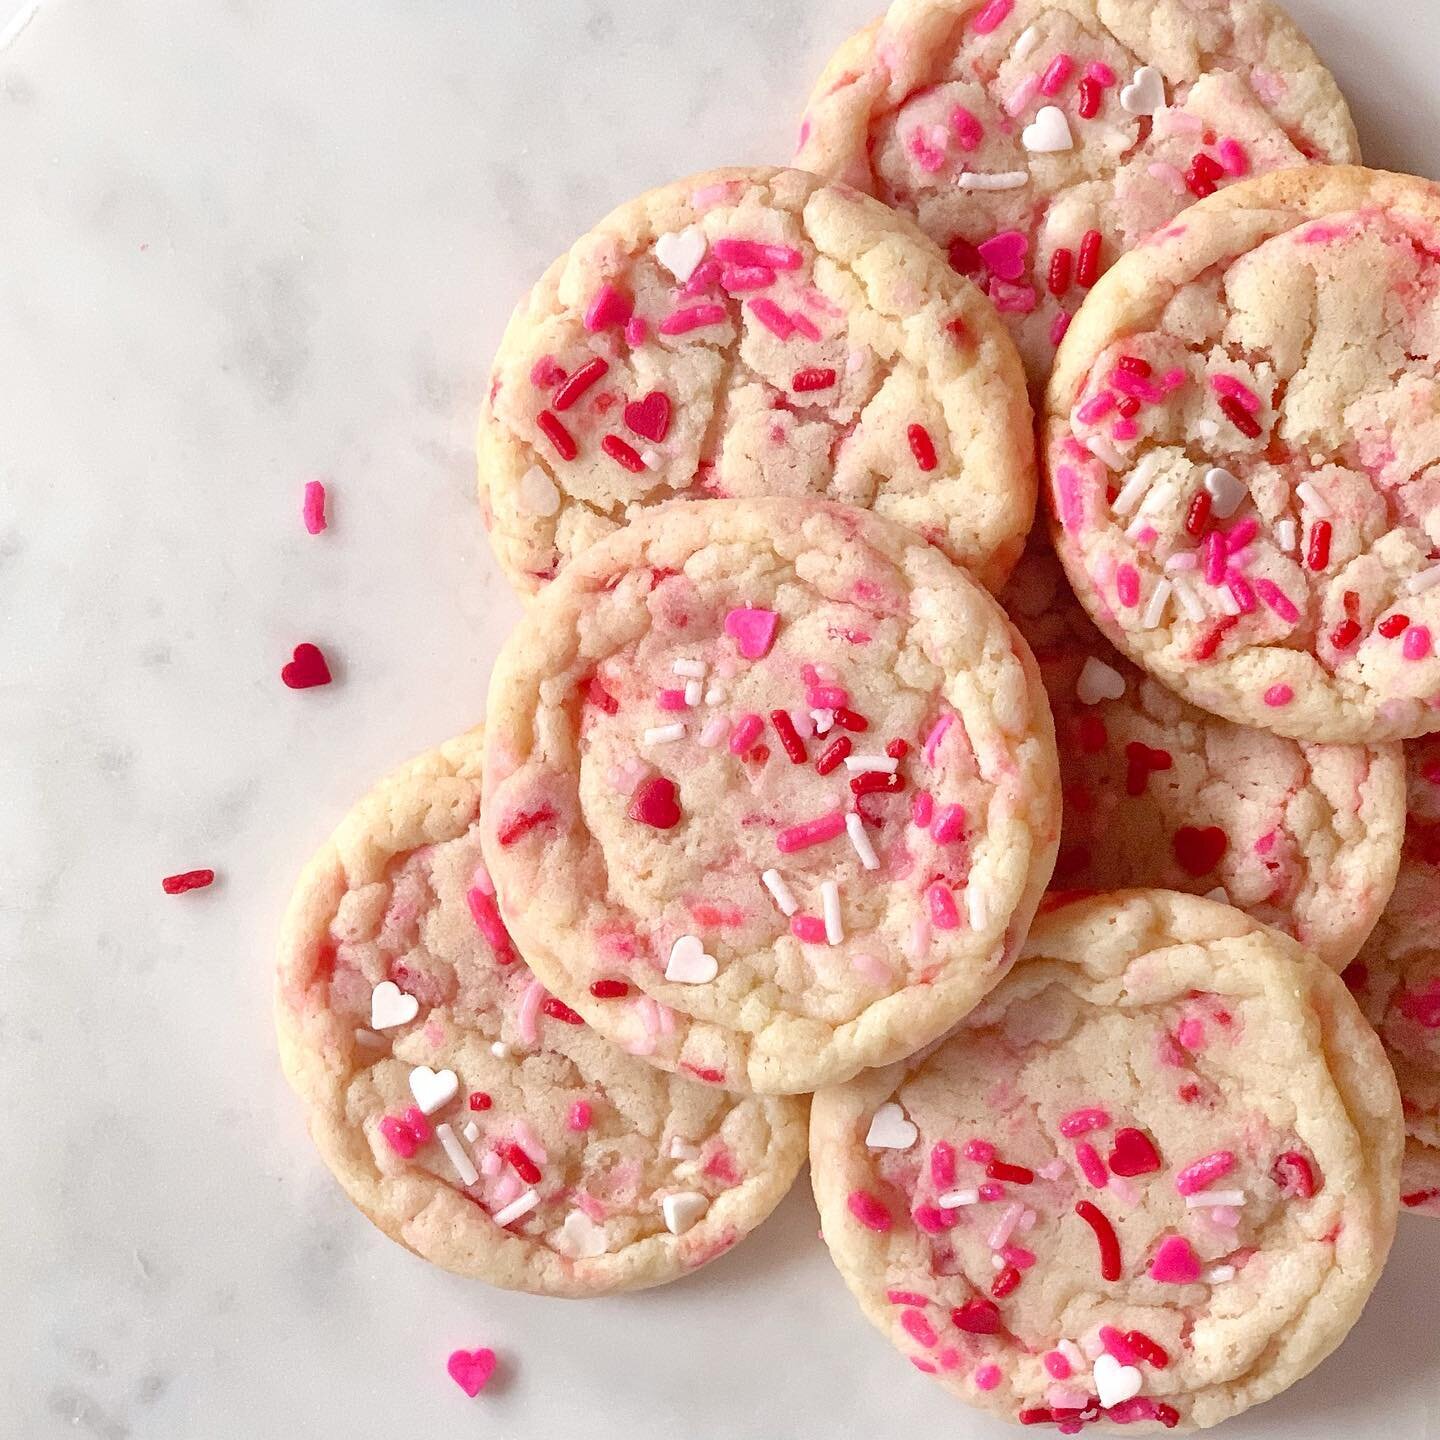 Another Valentine&rsquo;s Day treat! My favorite sugar cookie - chewy, buttery, light, with a good kick of vanilla - spruced up for the holiday!

💕Valentine&rsquo;s Confetti Cookies💕
$27/doz large | $32/2 doz mini

Available now through 2/14

Pleas